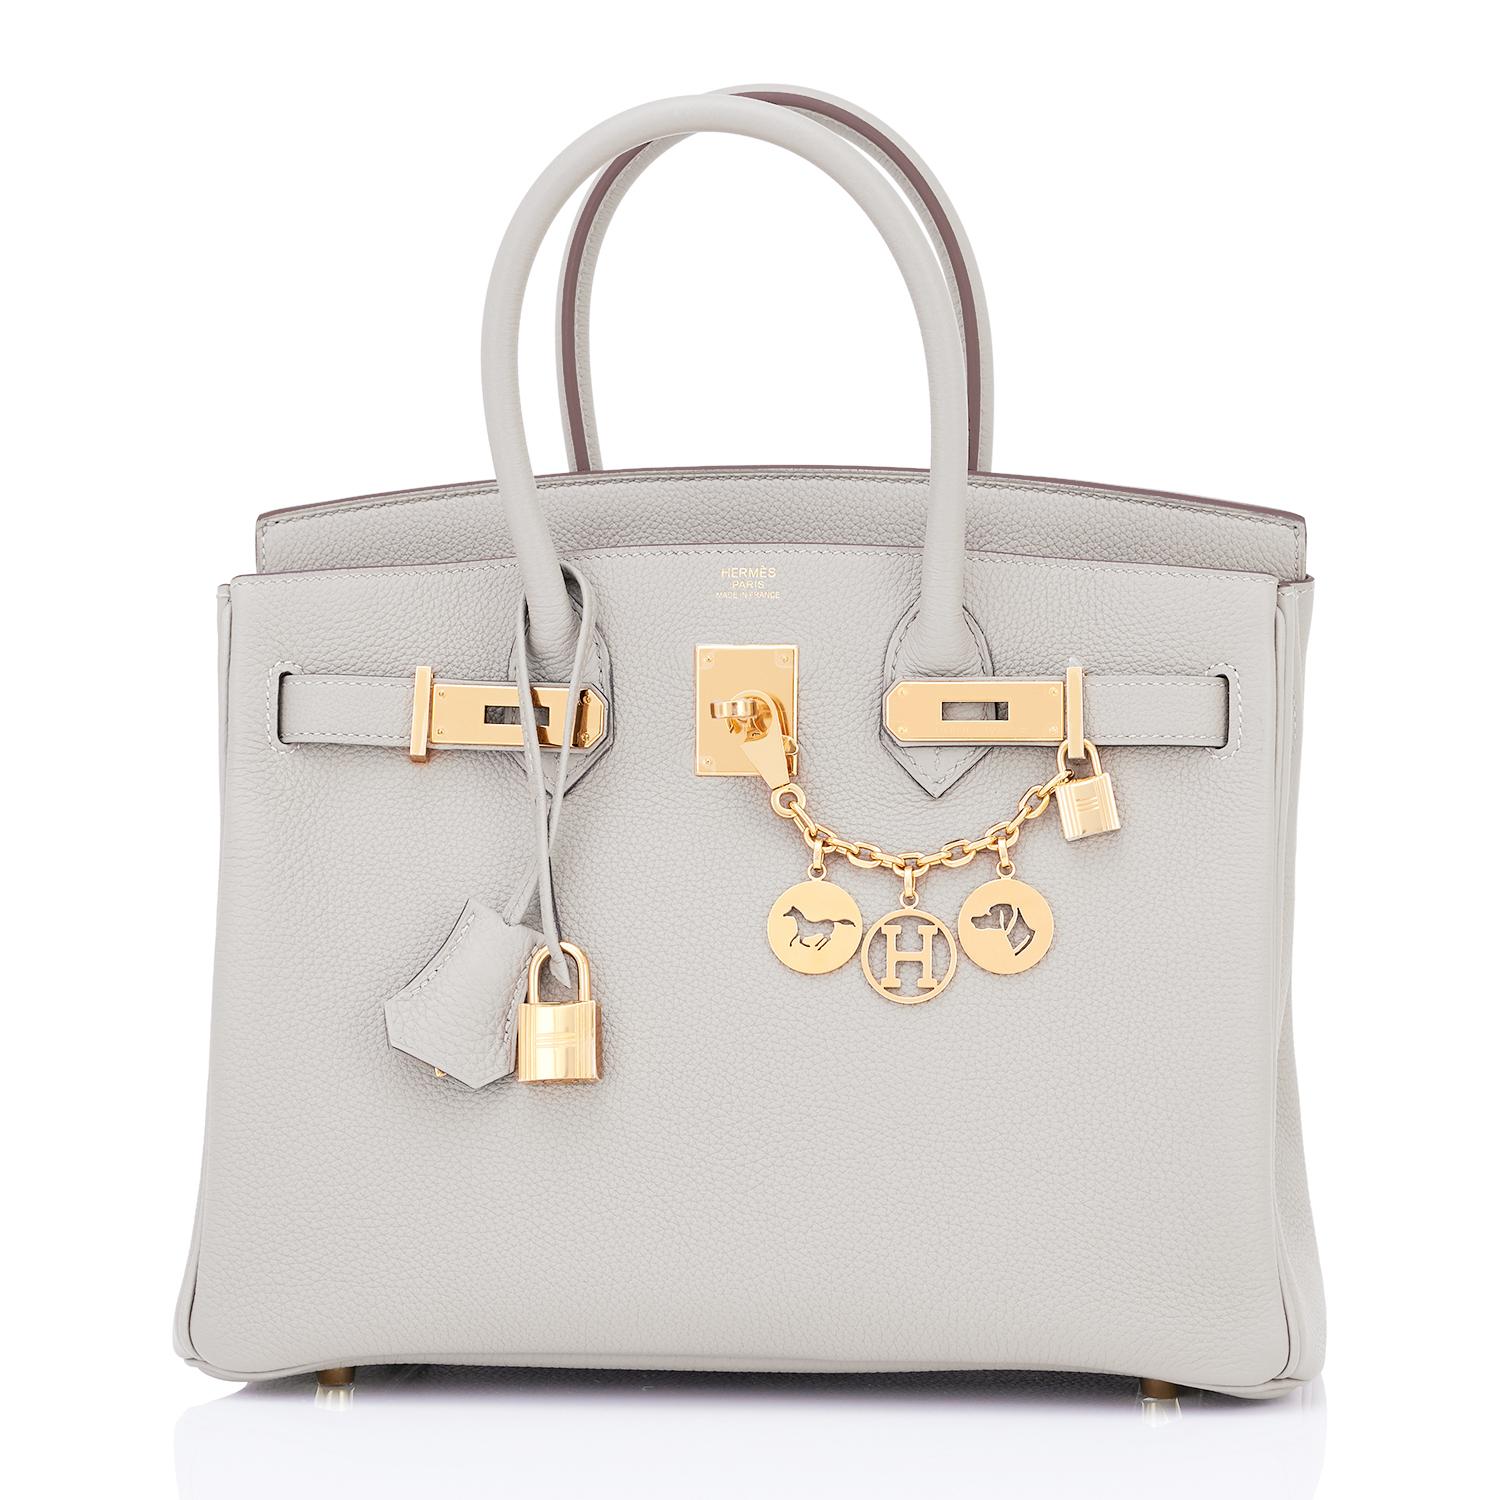 Hermes Birkin 30cm Gris Perle Togo Bag Gold Hardware Pearl Gray Y Stamp, 2020
Just purchased from Hermes store; bag bears new interior 2020 Y Stamp.
Brand New in Box in Store Fresh, Pristine Condition (with plastic on hardware)
Perfect Gift! Coming